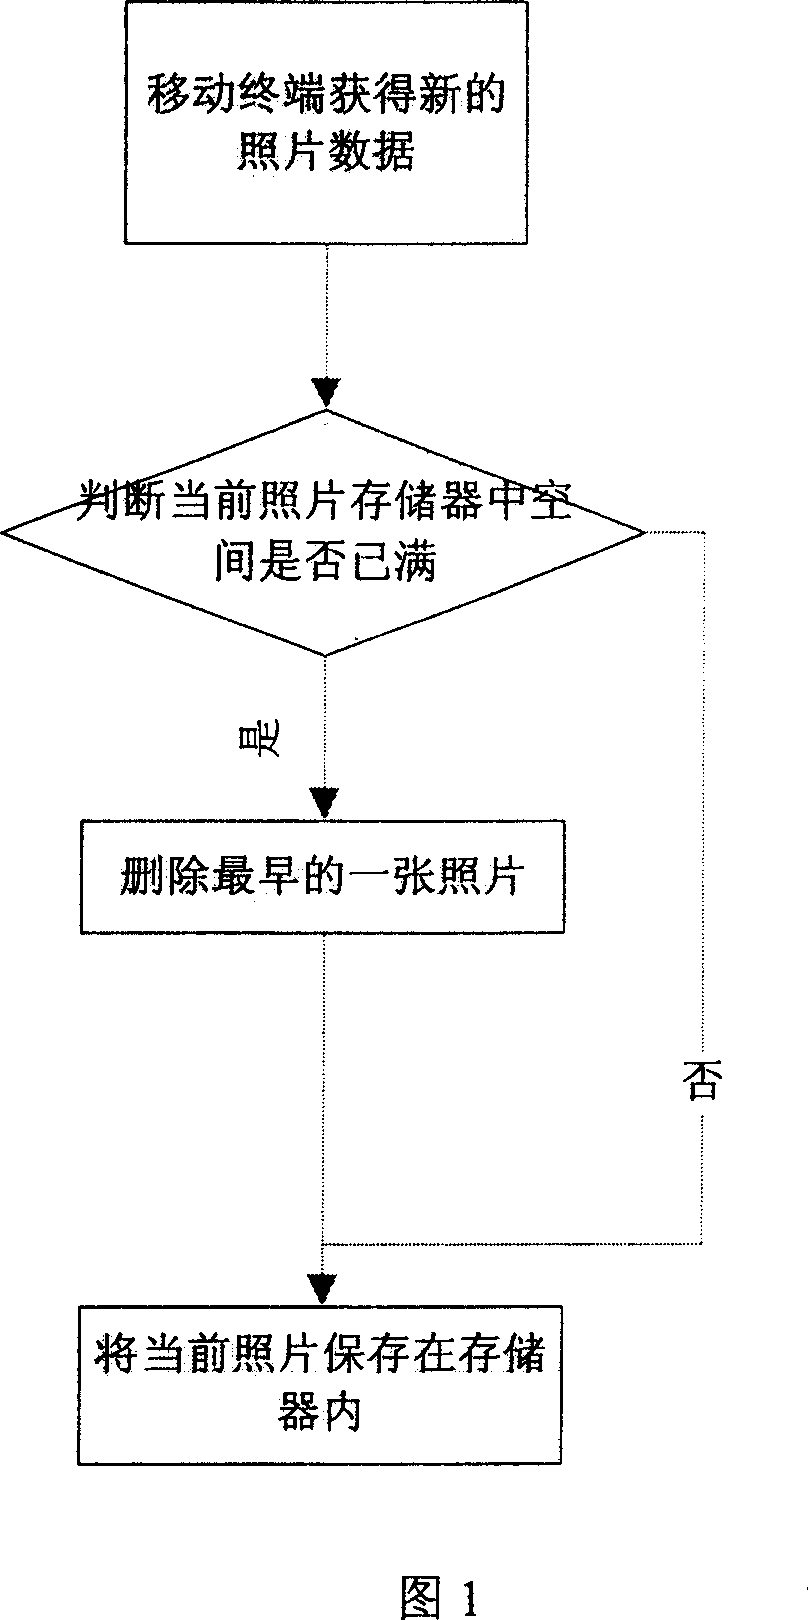 Image information transmitting and processing method used for emergency